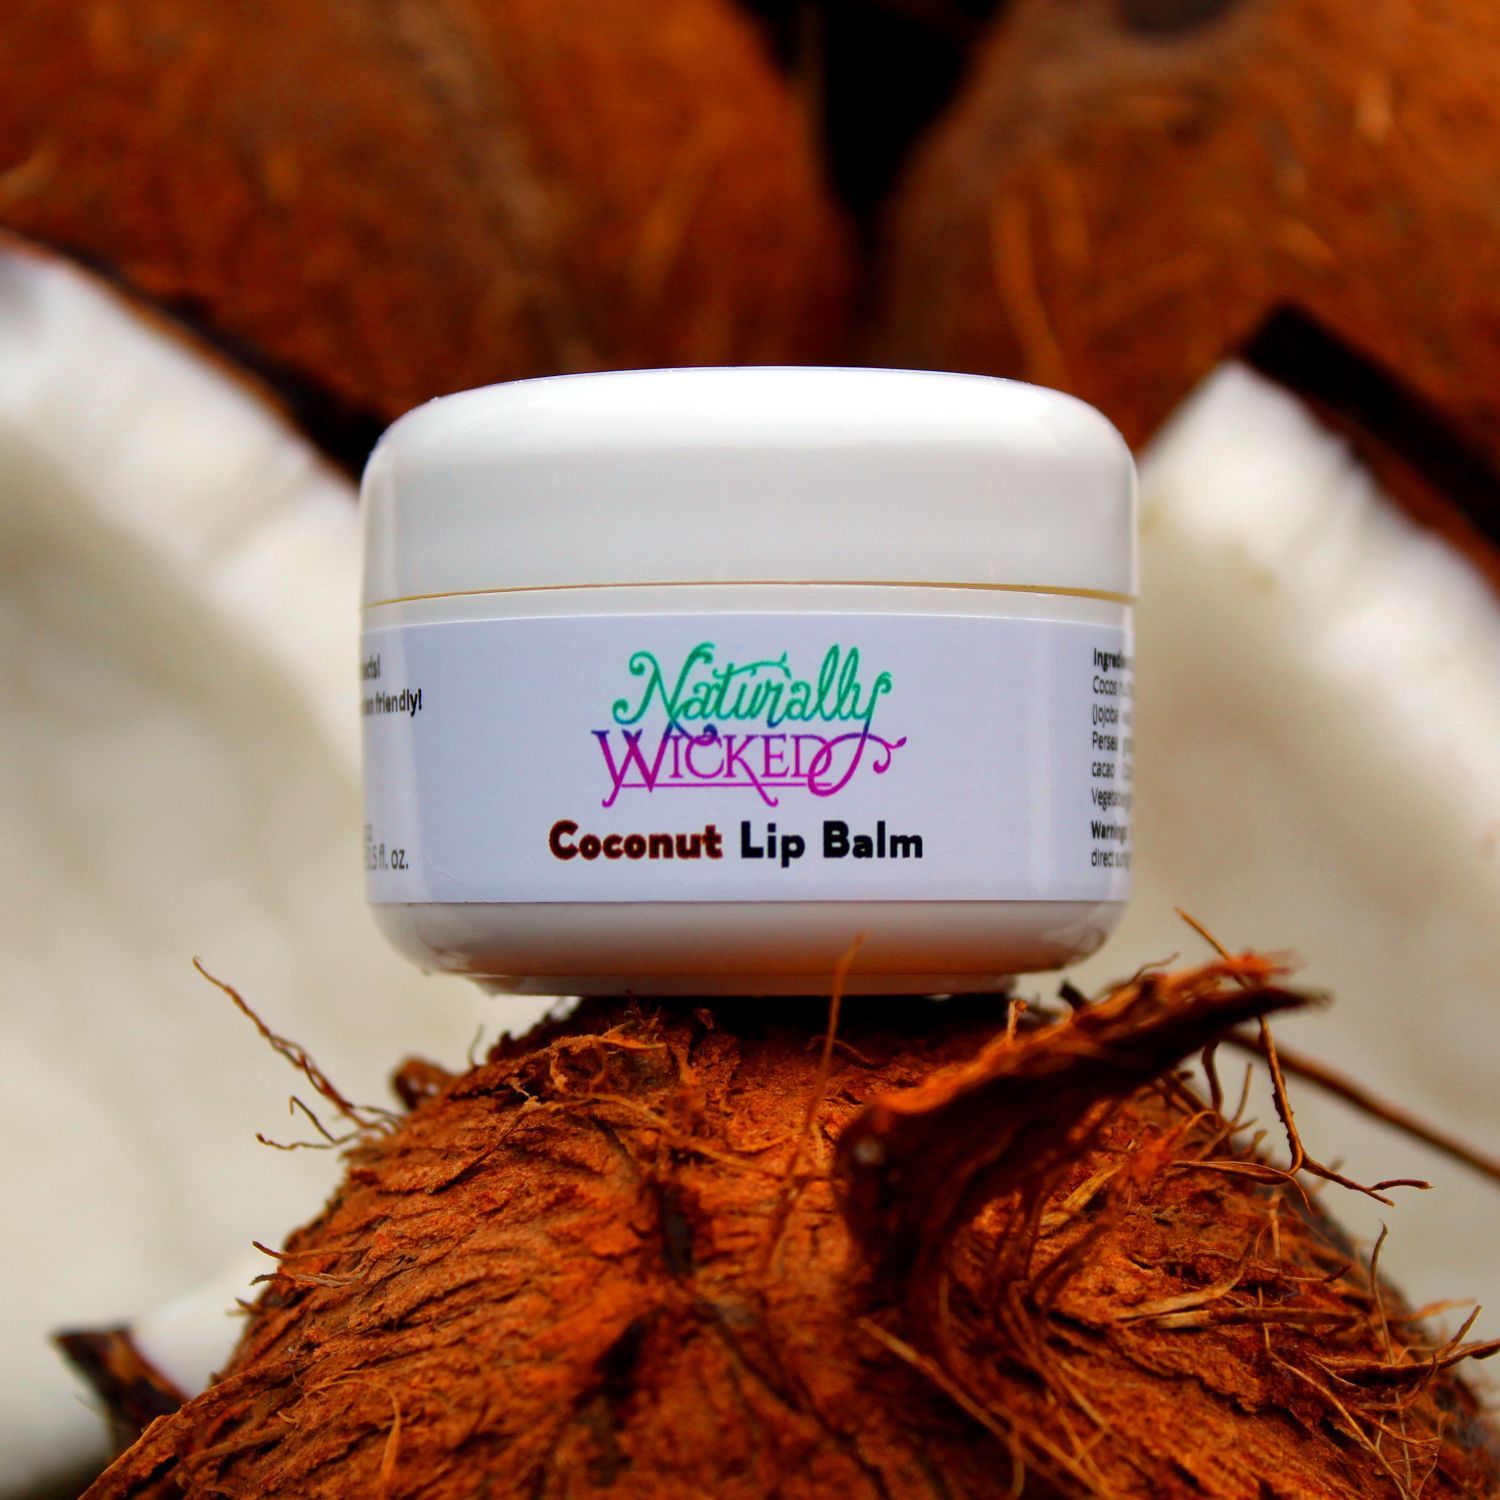 Naturally Wicked Natural Coconut Lip Balm Sat On Top Of Brown Coconut Surrounded By Coconut Shells